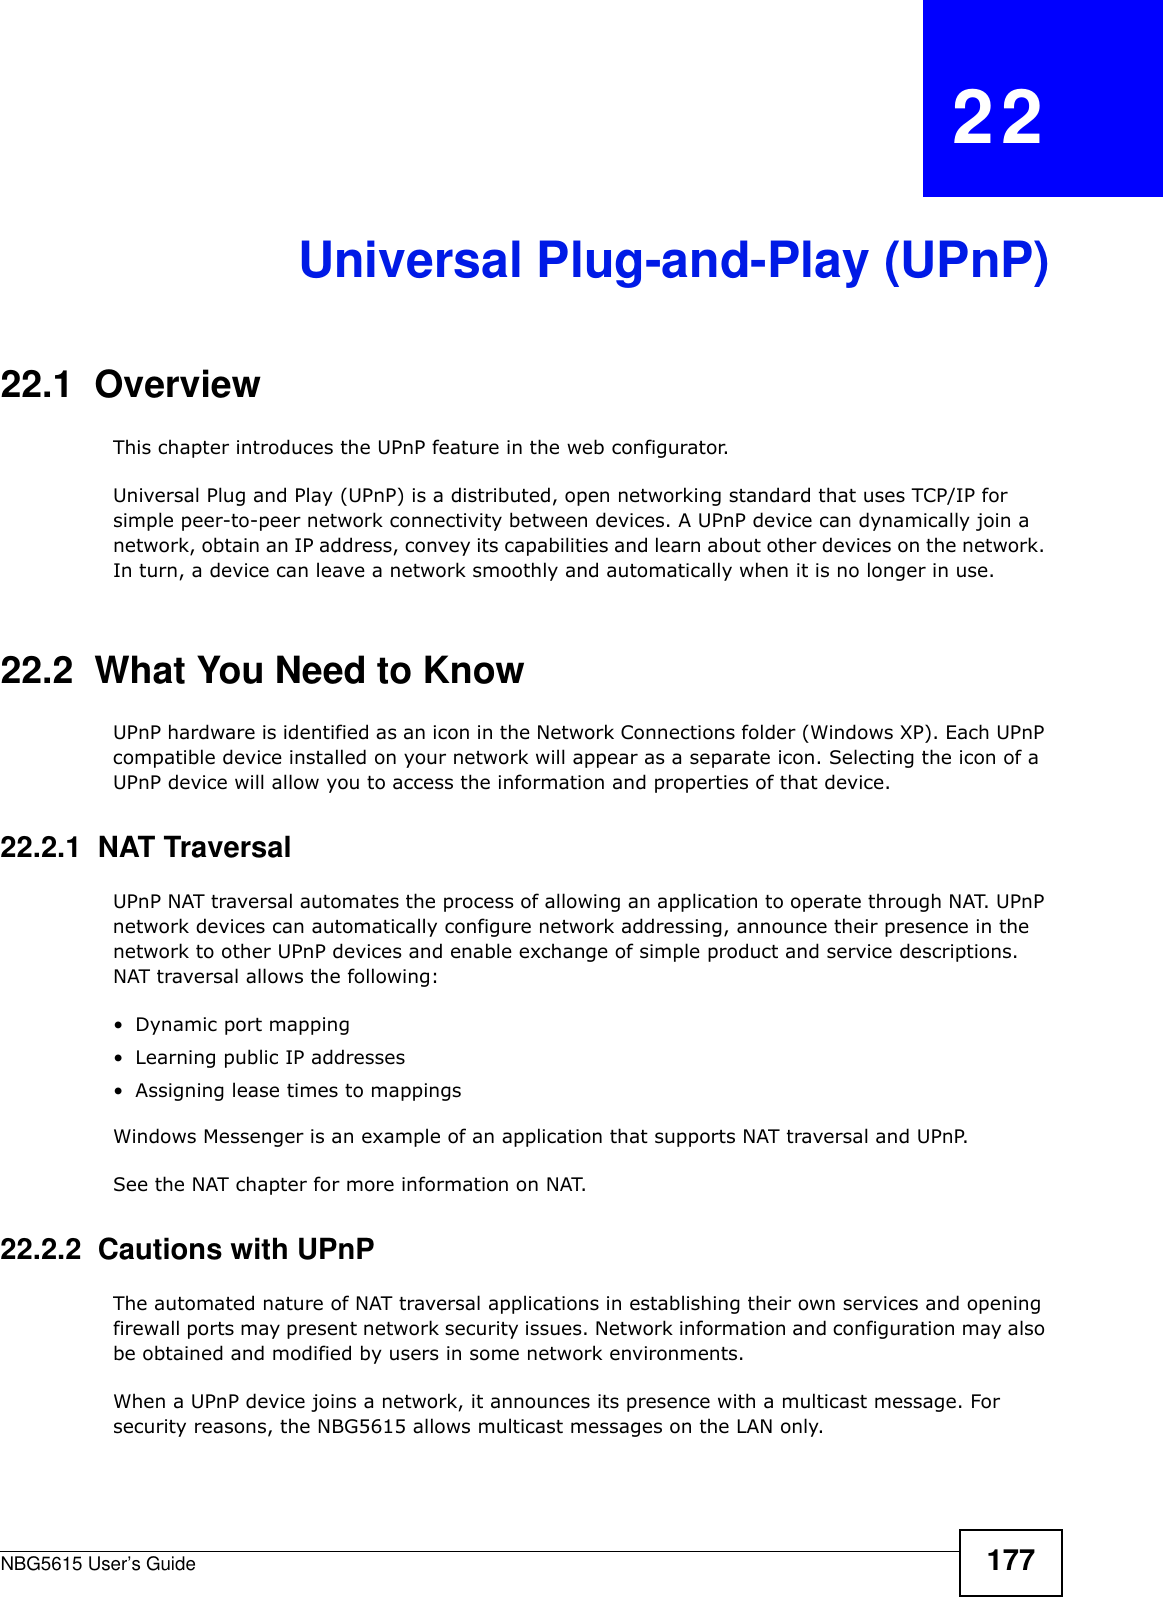 NBG5615 User’s Guide 177CHAPTER   22Universal Plug-and-Play (UPnP)22.1  Overview This chapter introduces the UPnP feature in the web configurator.Universal Plug and Play (UPnP) is a distributed, open networking standard that uses TCP/IP for simple peer-to-peer network connectivity between devices. A UPnP device can dynamically join a network, obtain an IP address, convey its capabilities and learn about other devices on the network. In turn, a device can leave a network smoothly and automatically when it is no longer in use.22.2  What You Need to KnowUPnP hardware is identified as an icon in the Network Connections folder (Windows XP). Each UPnP compatible device installed on your network will appear as a separate icon. Selecting the icon of a UPnP device will allow you to access the information and properties of that device. 22.2.1  NAT TraversalUPnP NAT traversal automates the process of allowing an application to operate through NAT. UPnP network devices can automatically configure network addressing, announce their presence in the network to other UPnP devices and enable exchange of simple product and service descriptions. NAT traversal allows the following:• Dynamic port mapping• Learning public IP addresses• Assigning lease times to mappingsWindows Messenger is an example of an application that supports NAT traversal and UPnP. See the NAT chapter for more information on NAT.22.2.2  Cautions with UPnPThe automated nature of NAT traversal applications in establishing their own services and opening firewall ports may present network security issues. Network information and configuration may also be obtained and modified by users in some network environments. When a UPnP device joins a network, it announces its presence with a multicast message. For security reasons, the NBG5615 allows multicast messages on the LAN only.